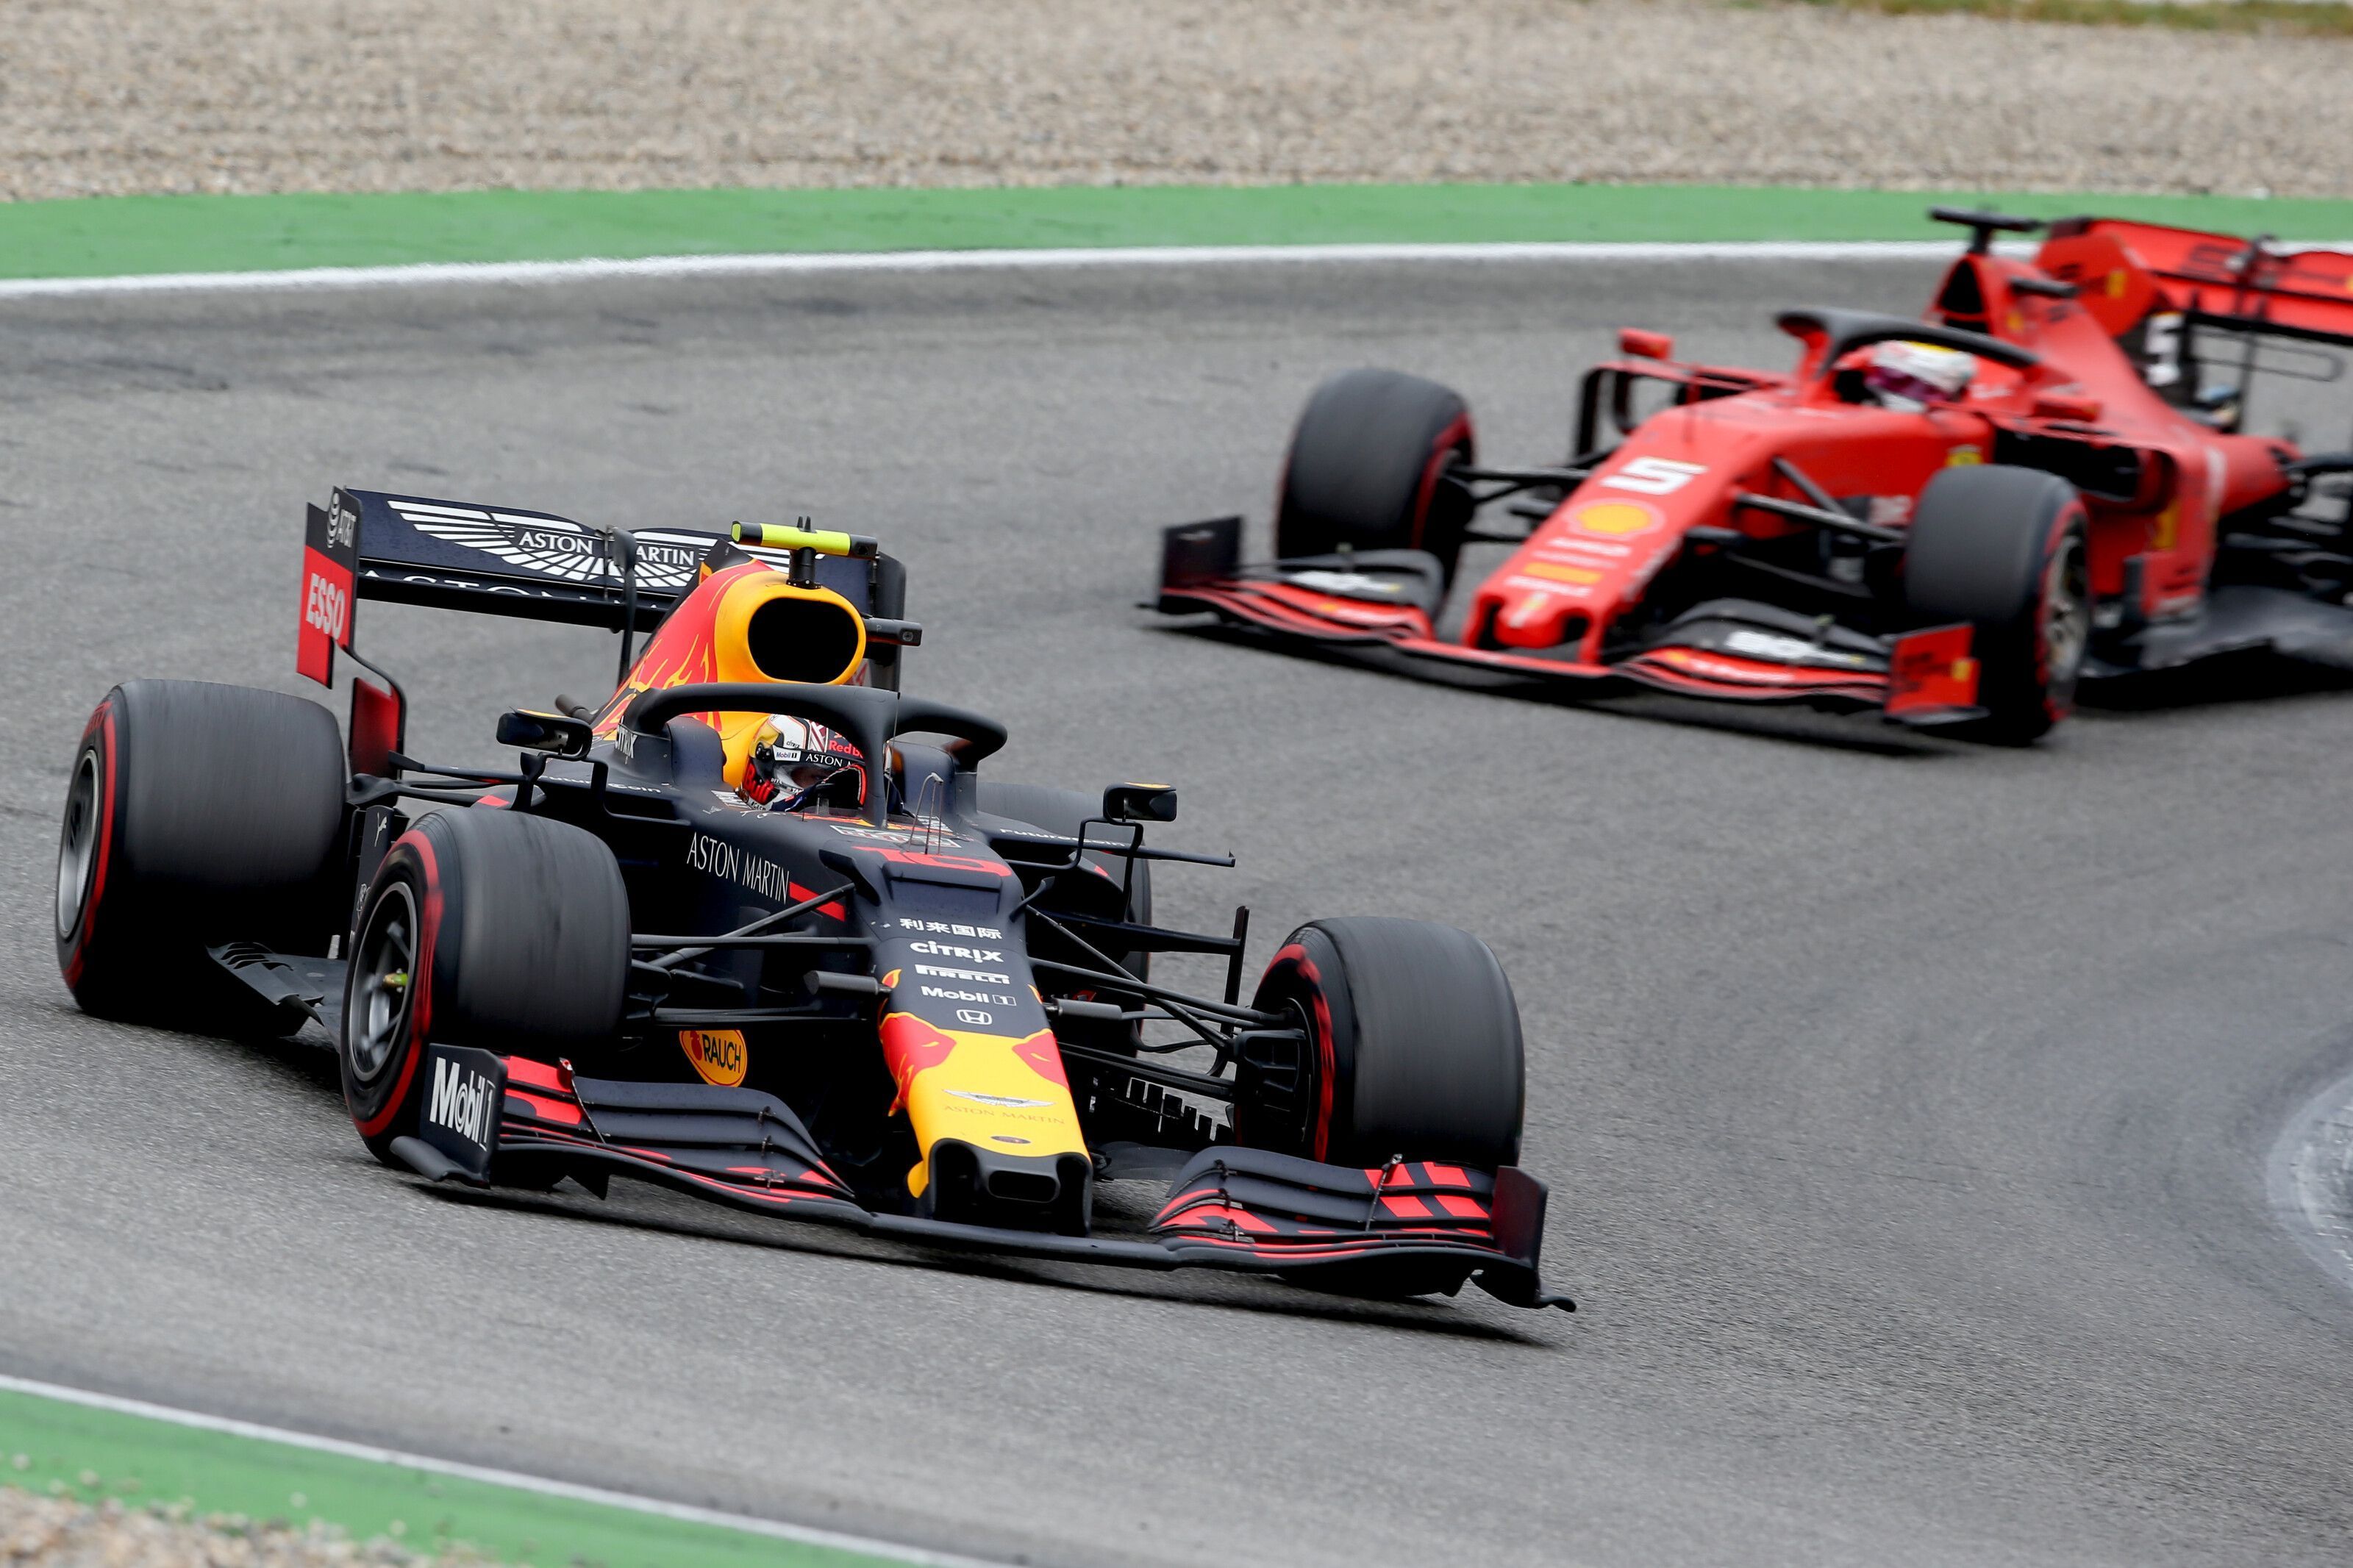 Ferrari, Red Bull tag each other as Mexico GP favourites, Mercedes behind